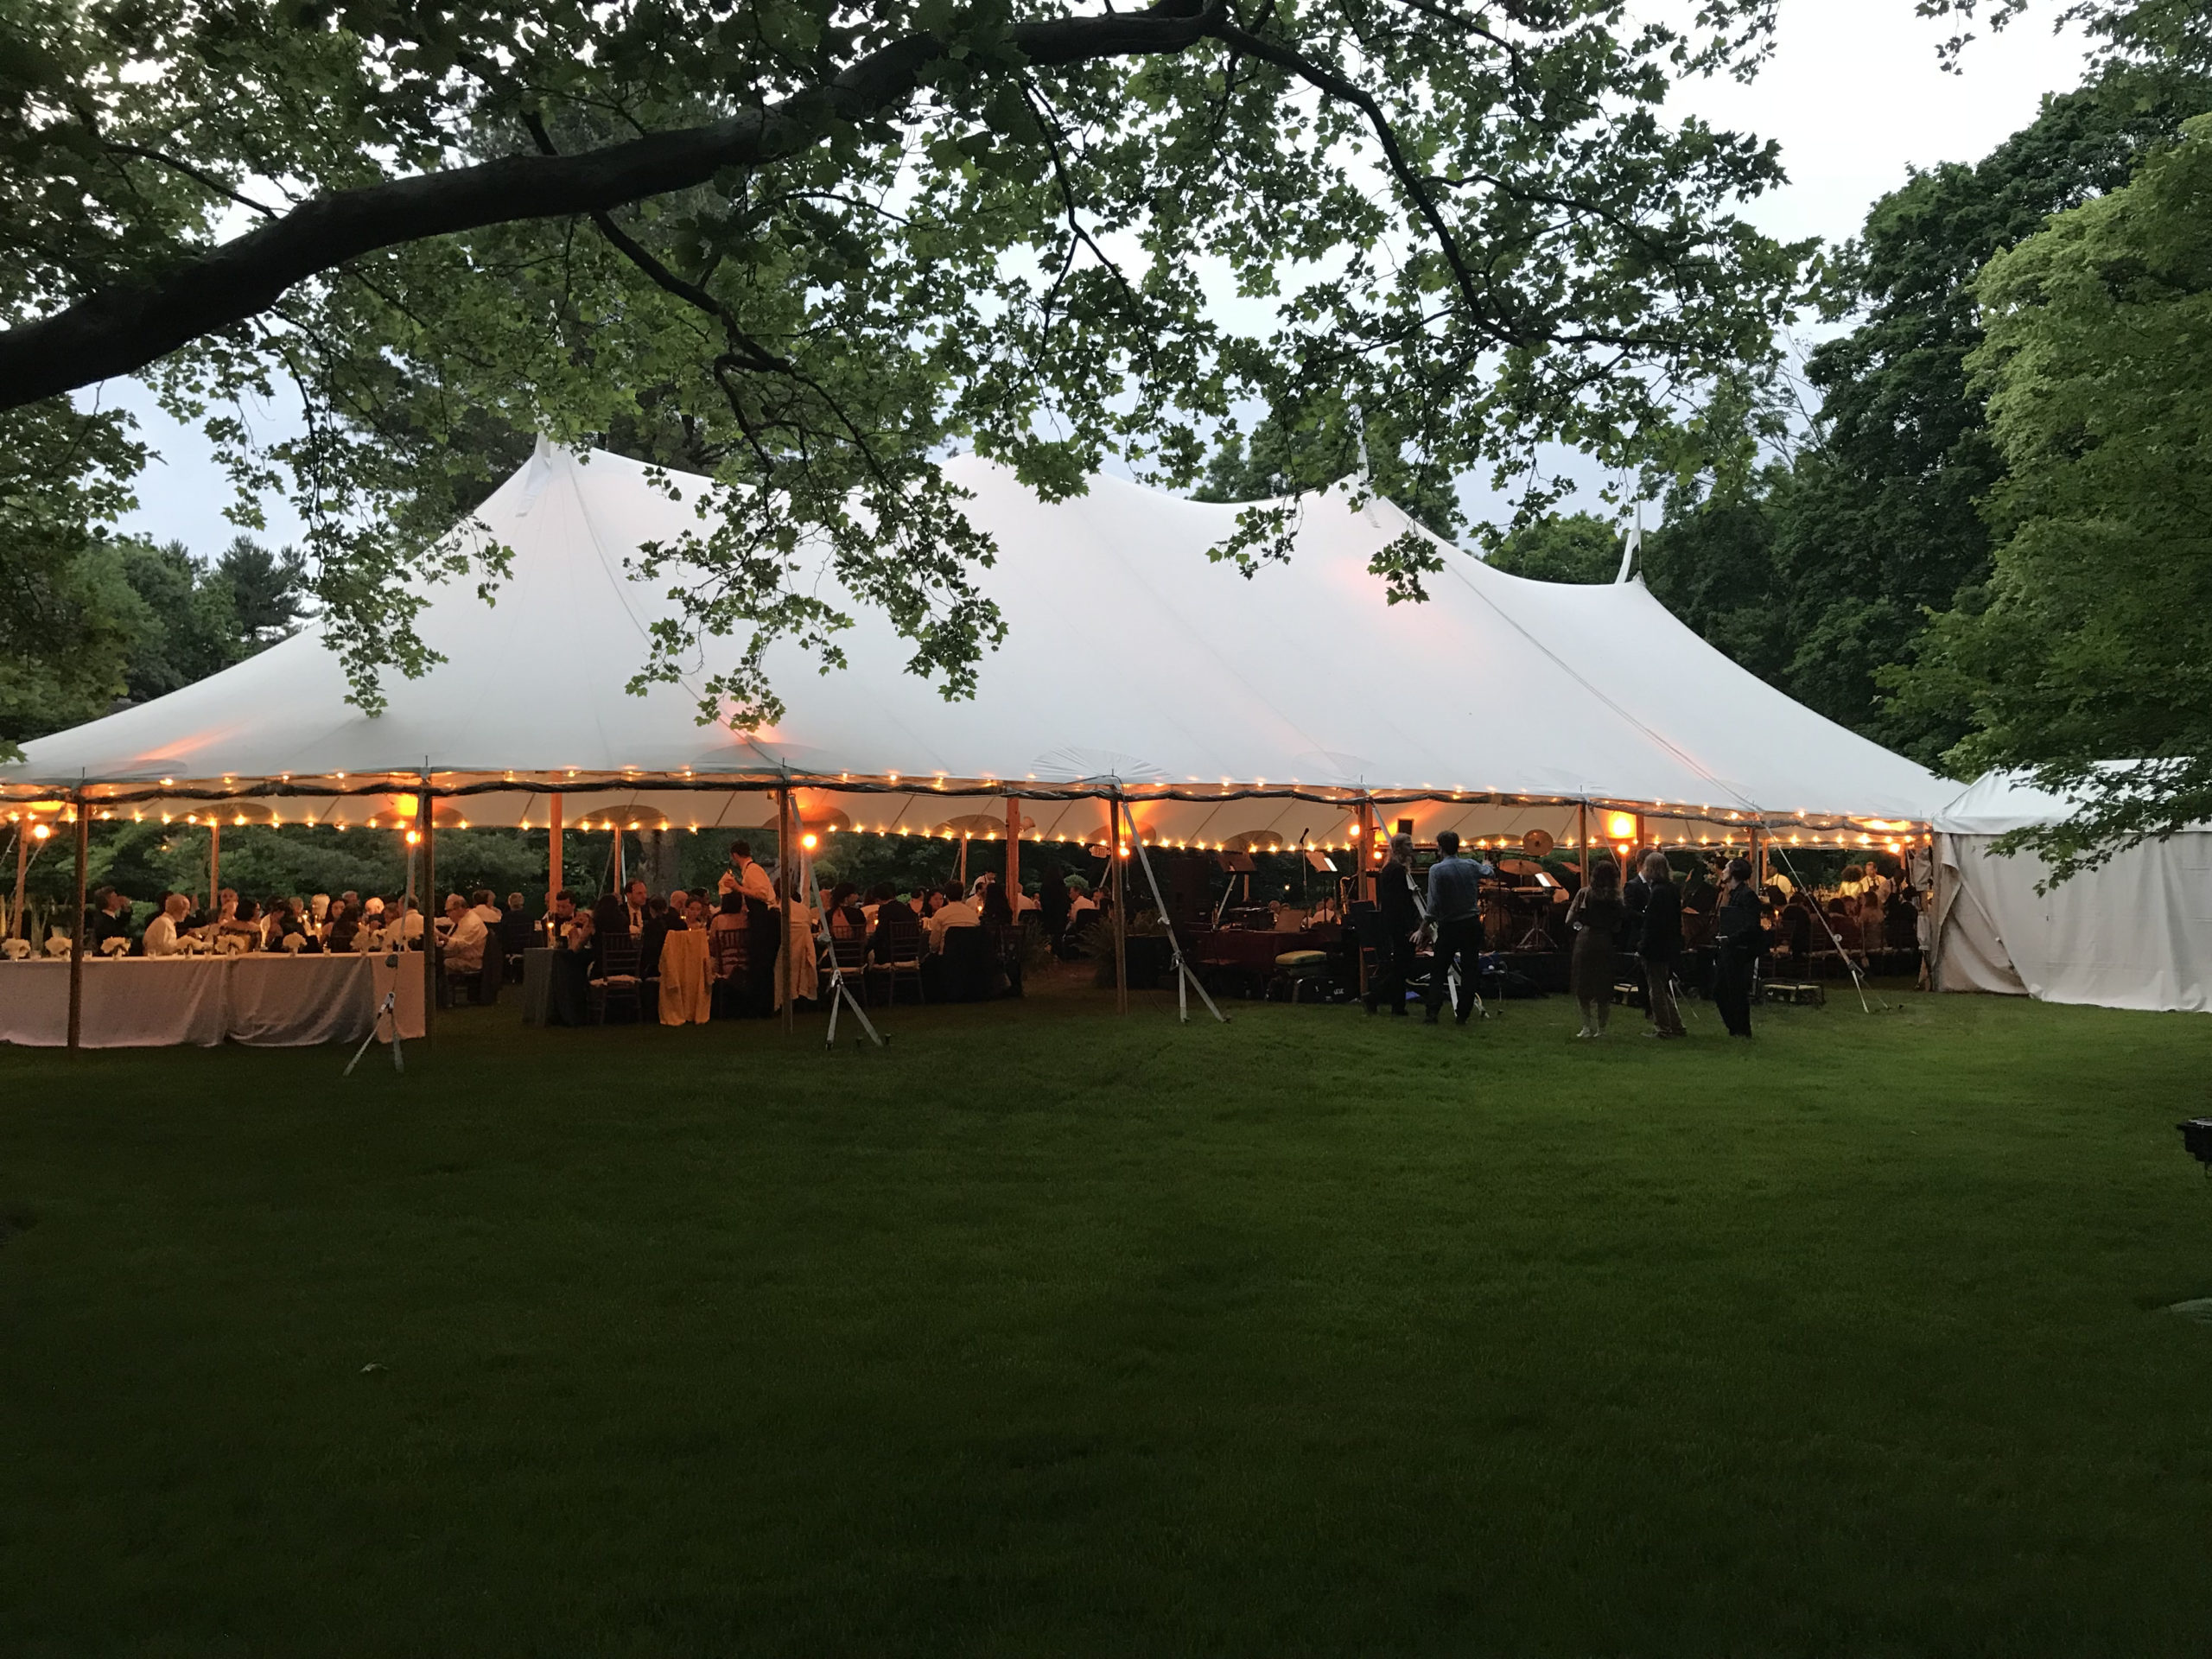 A single catered event at a Hamptons home can involve a dozen companies and hundreds of employees and generate thousands, or millions, of dollars in revenue for the local economy.